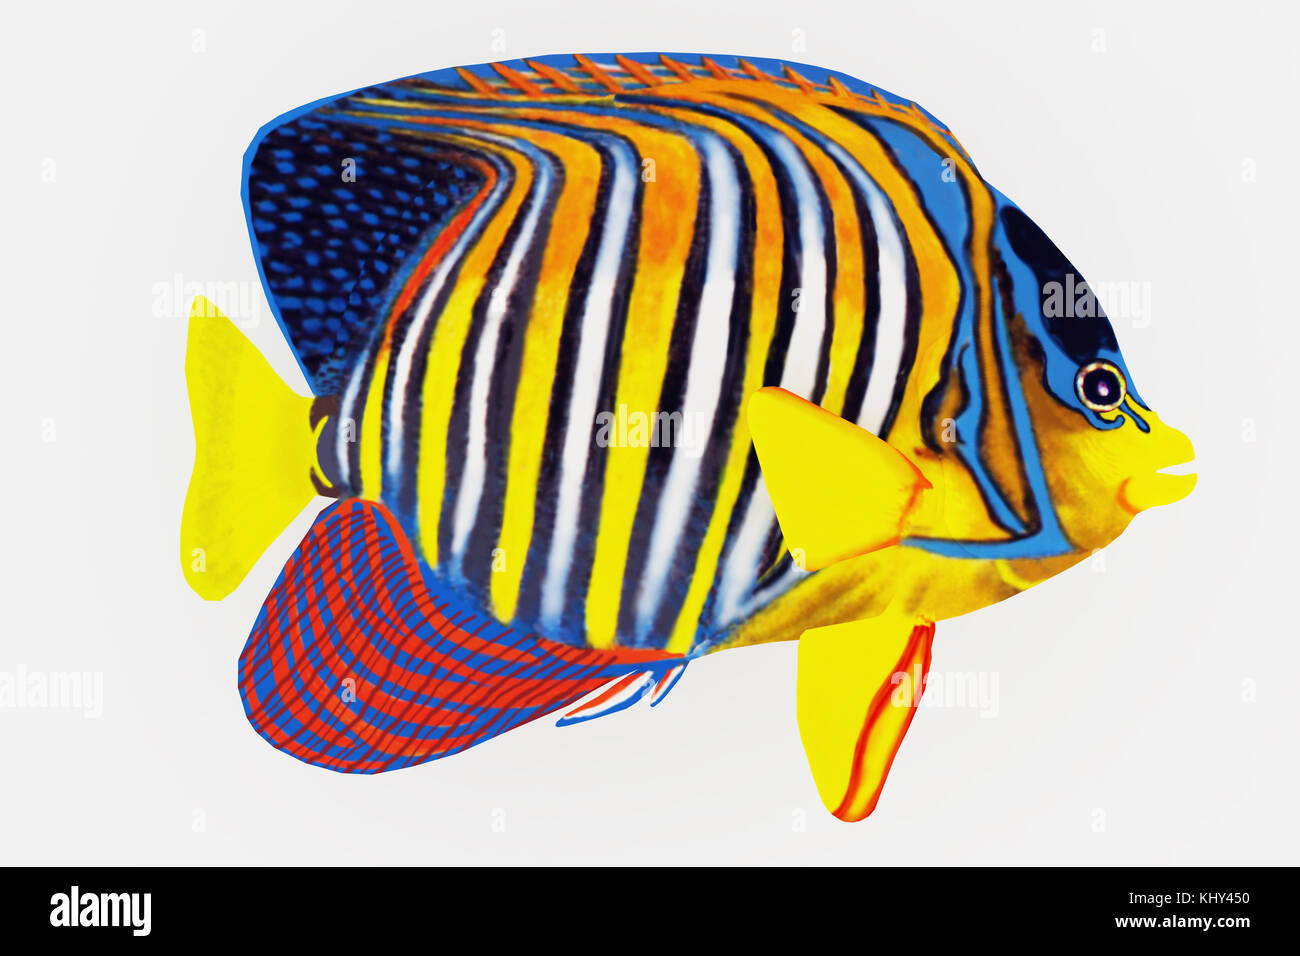 Royal Angelfish - The Royal Angelfish is a saltwater species reef fish in tropical regions of Indo-Pacific oceans. Stock Photo